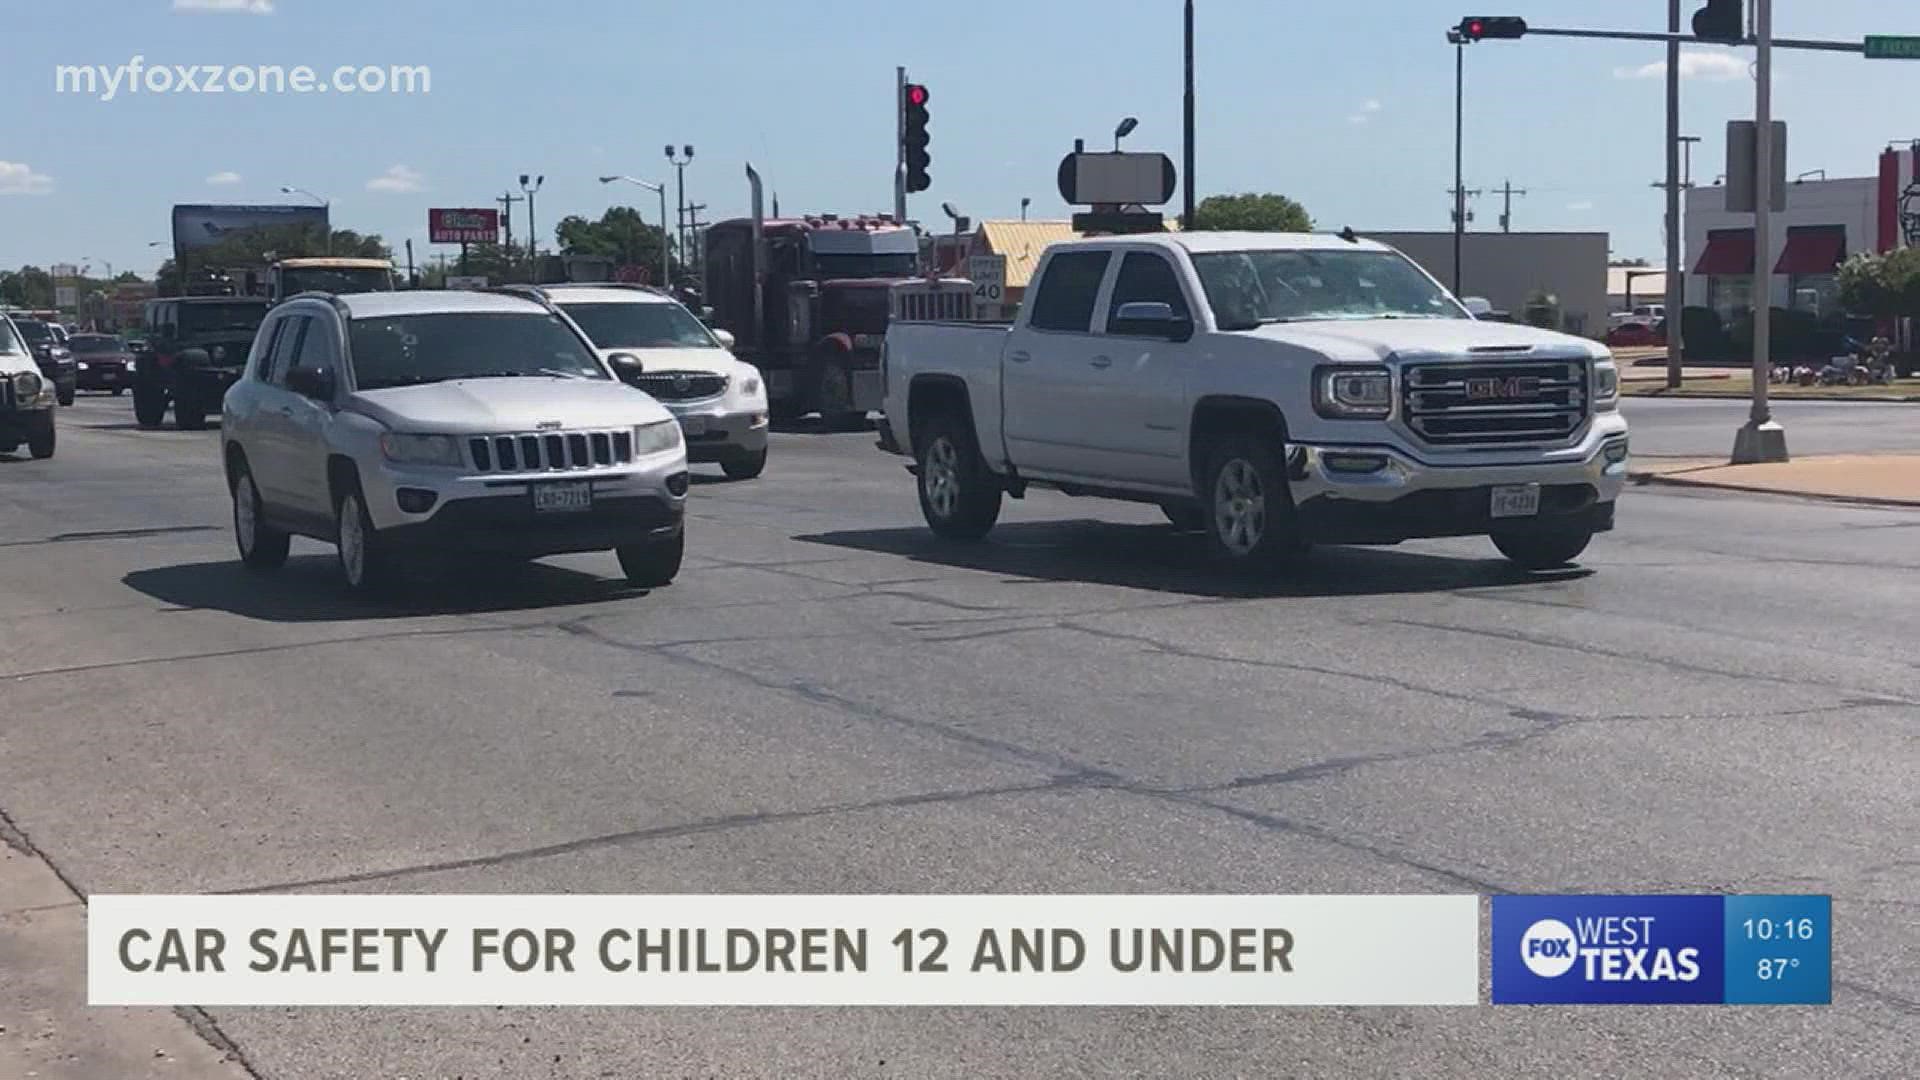 With the number of car accidents high in West Texas, learning more about child car safety can help parents be prepared if something bad happens while on the road.